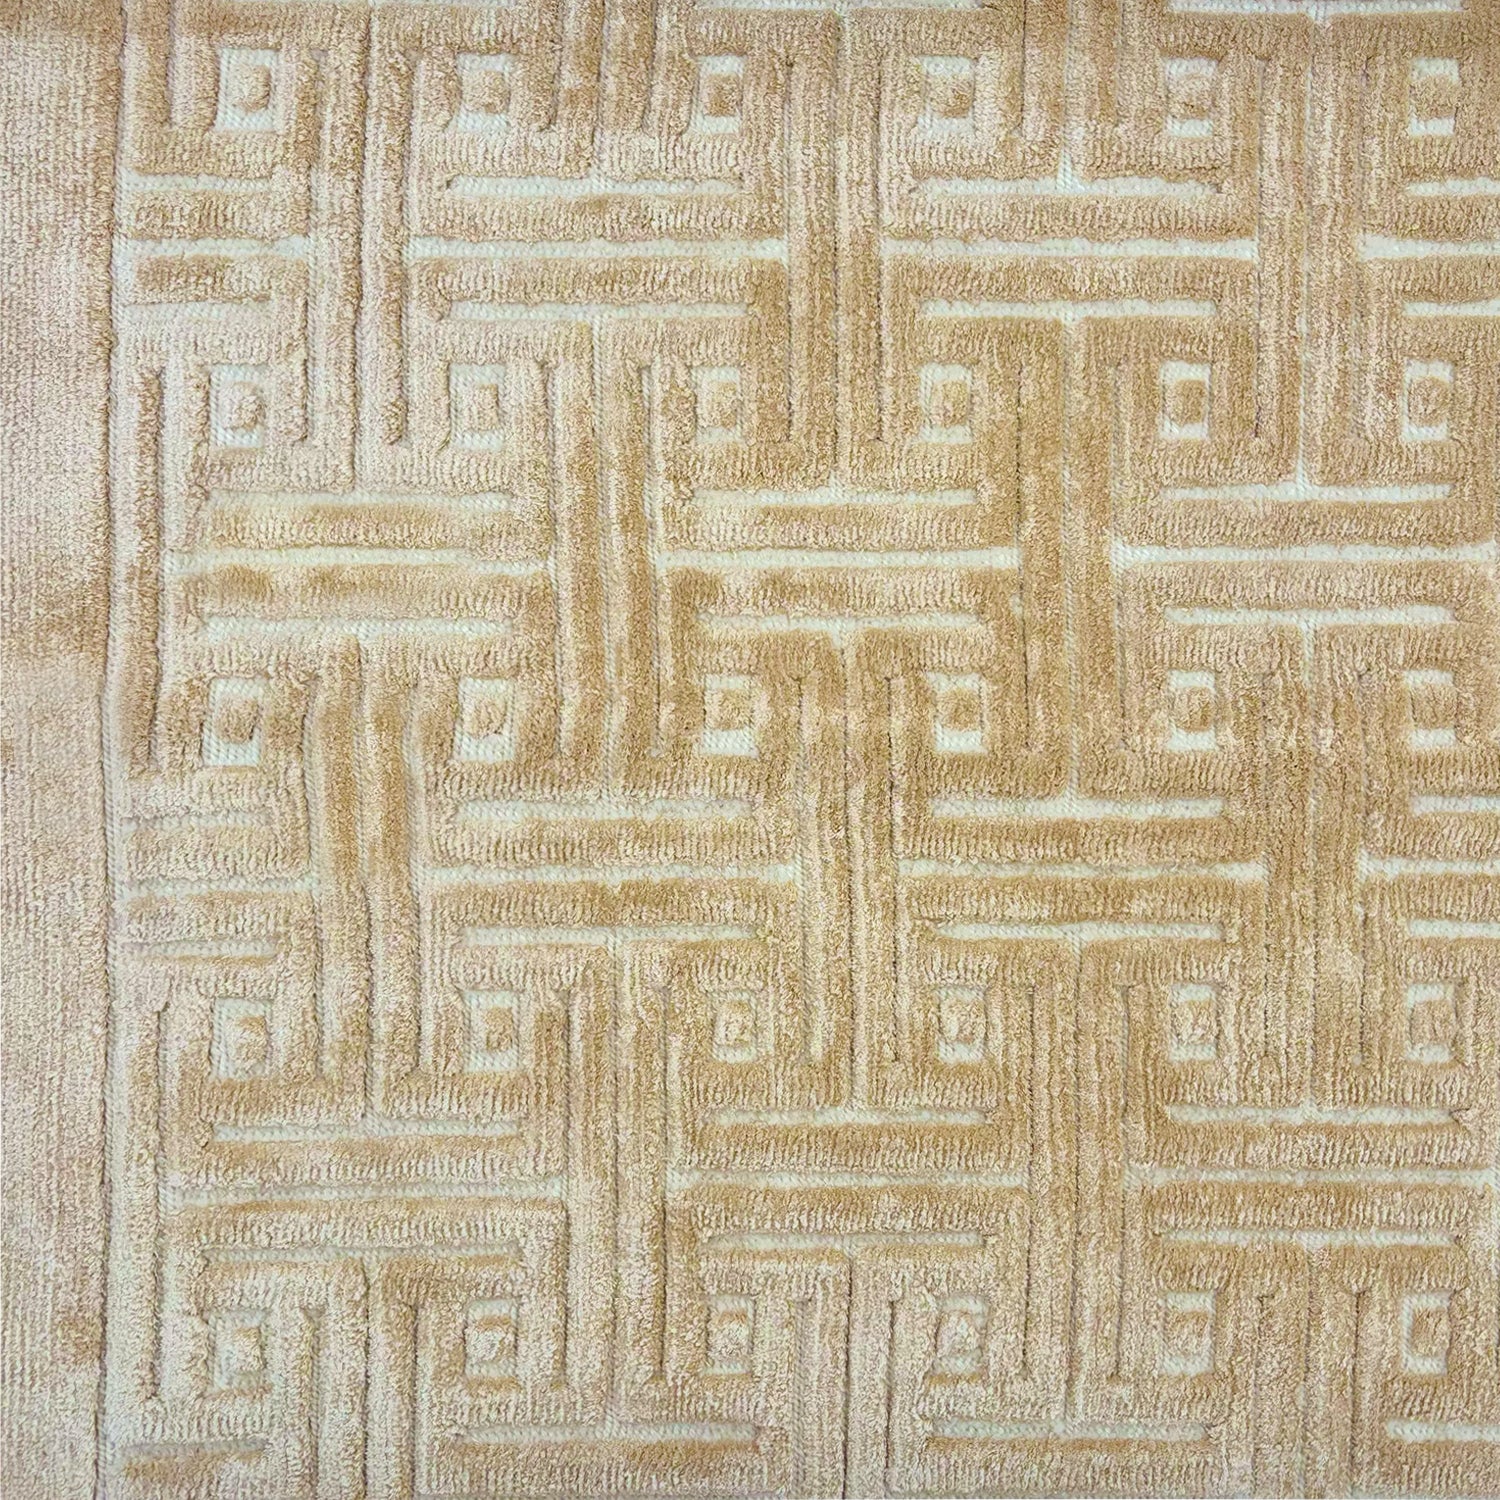 Detail of a handknotted rug with a greek key inspired pattern in shades of cream